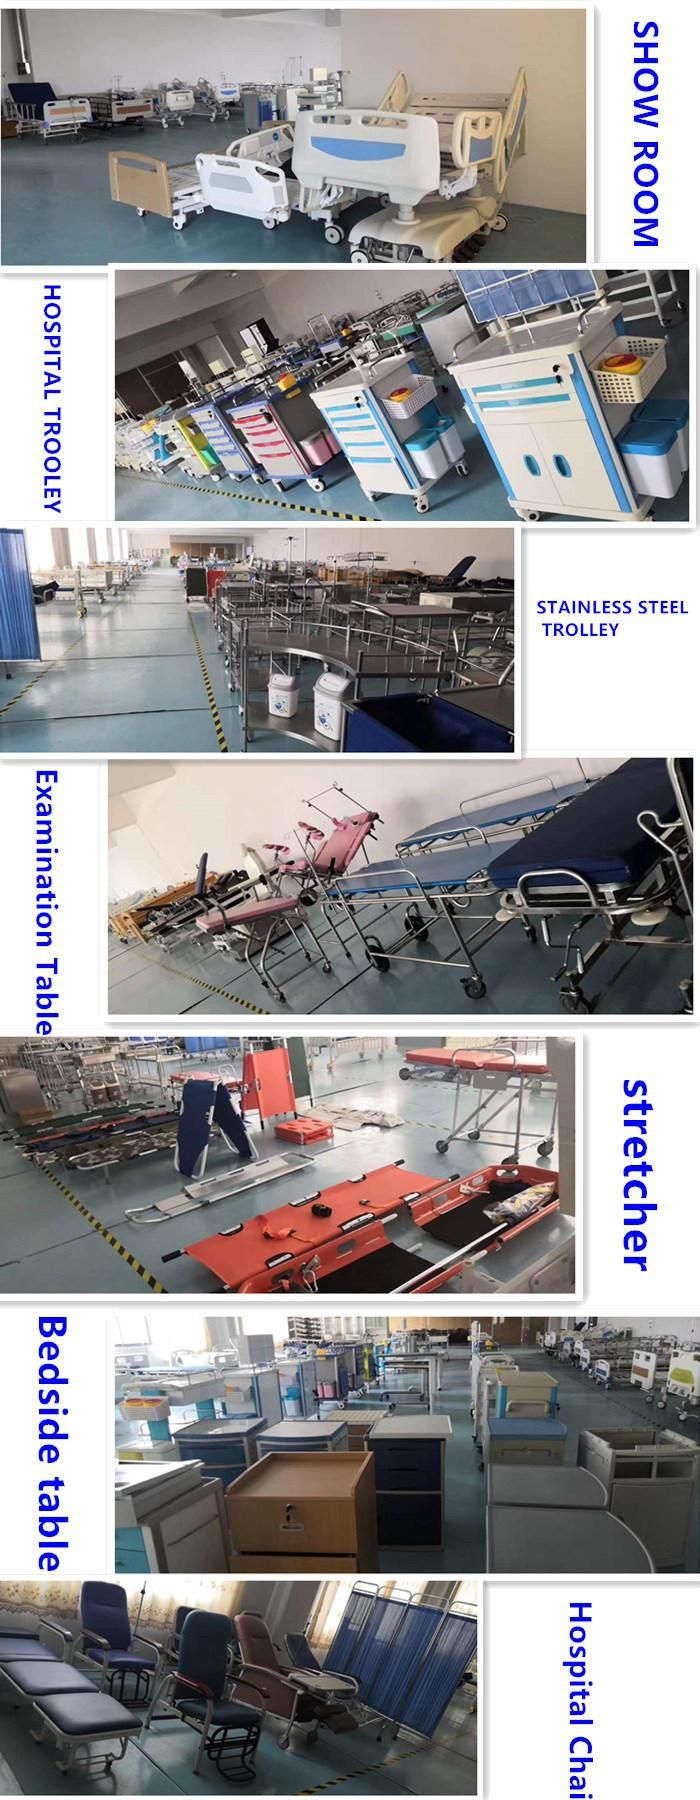 Ordinary Stainless Steel Simple Medical Obstetric Bed